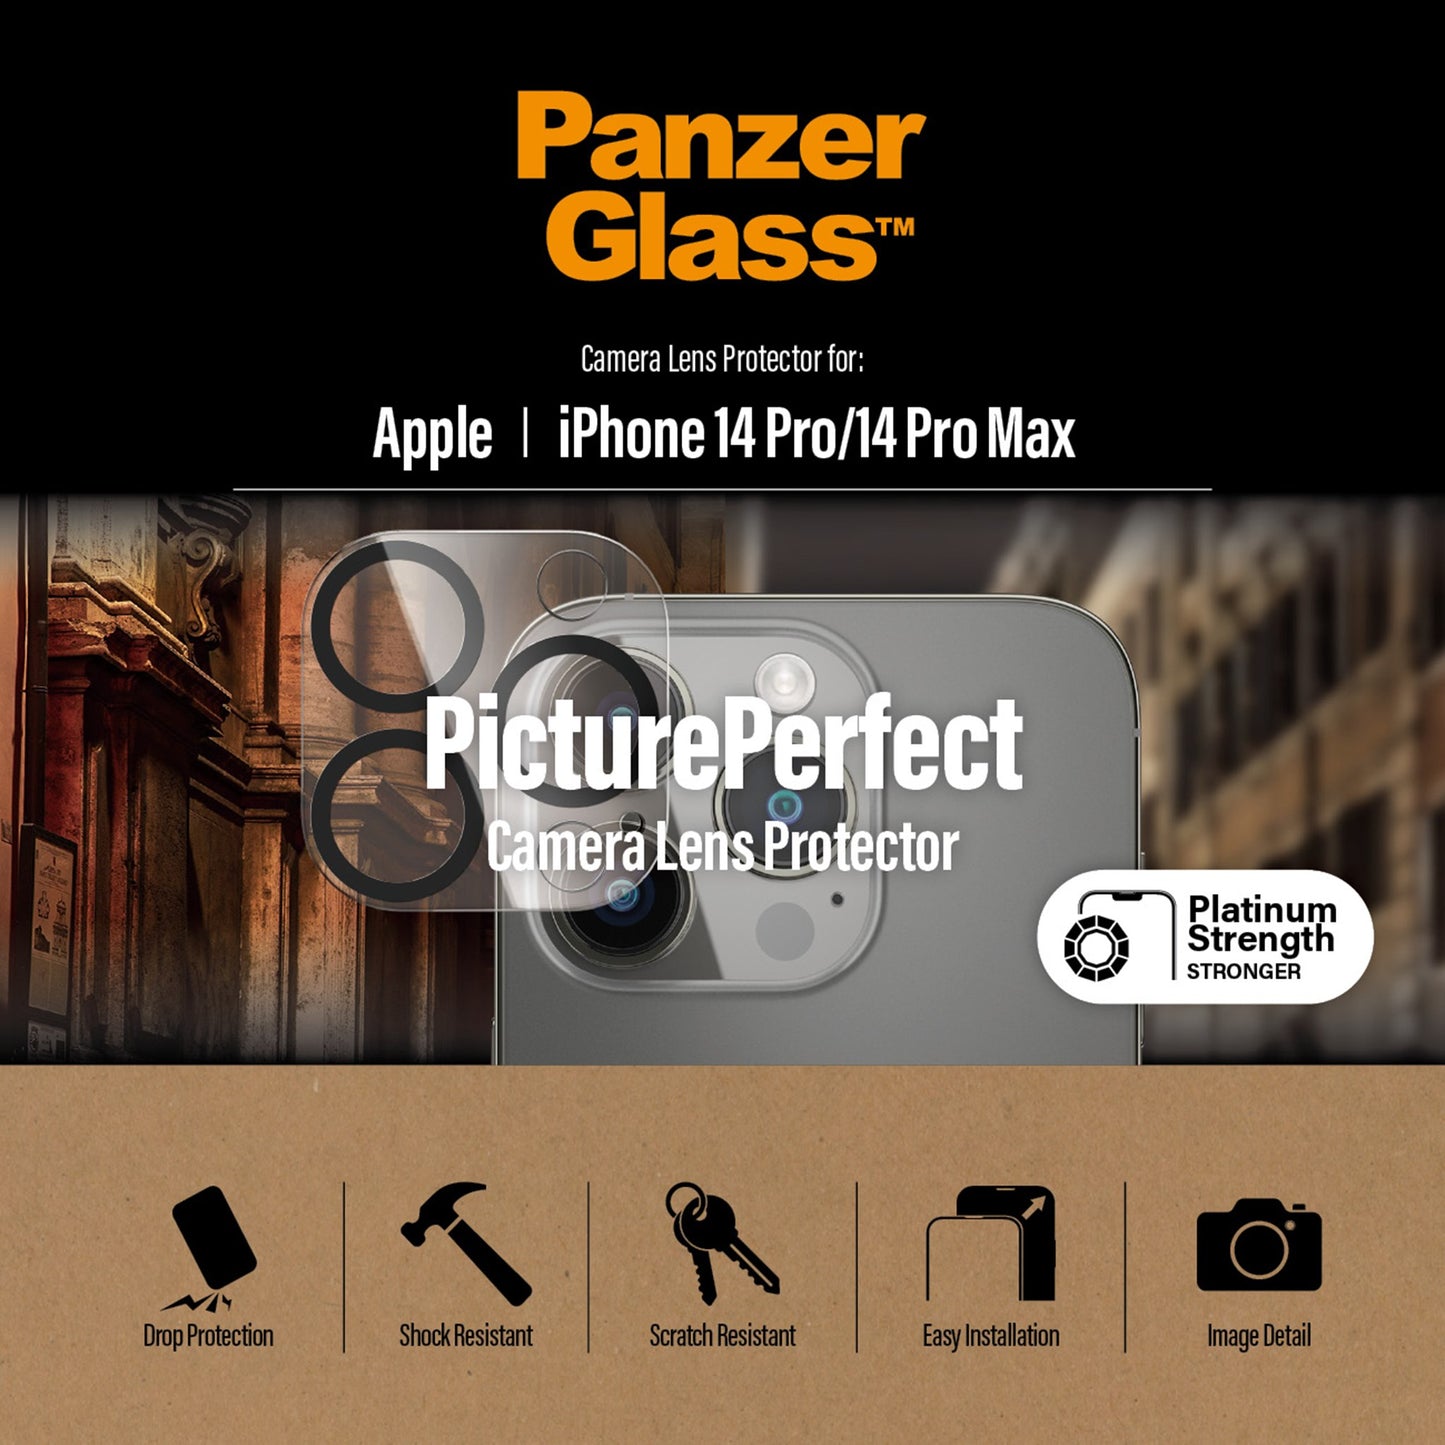 PanzerGlass® PicturePerfect Camera Lens Protector Apple iPhone 14 Pro | 14 Pro Max 4